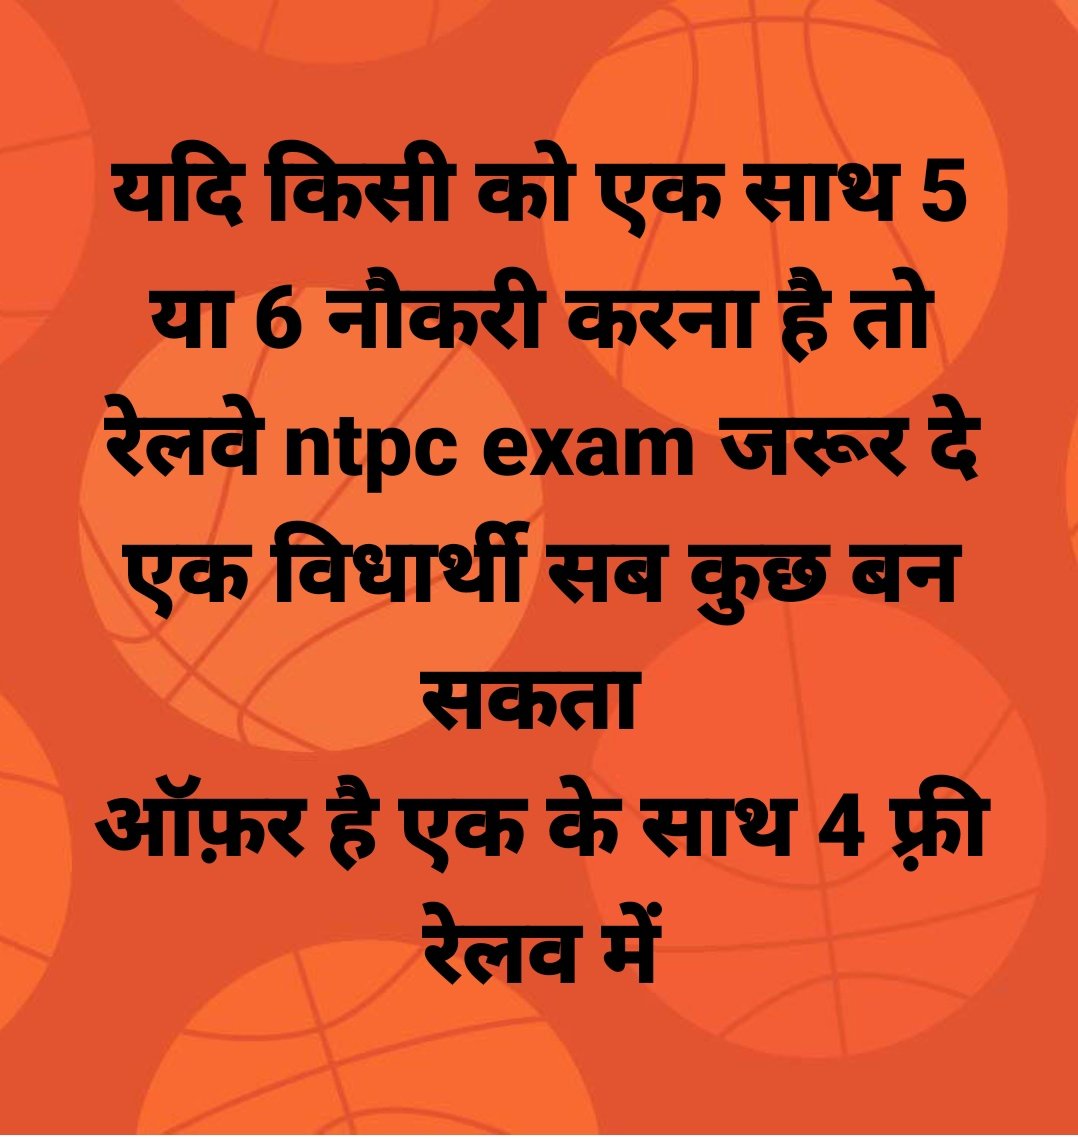 #NTPC1_student_1result 
#ntpc_cbt_1_revise_result